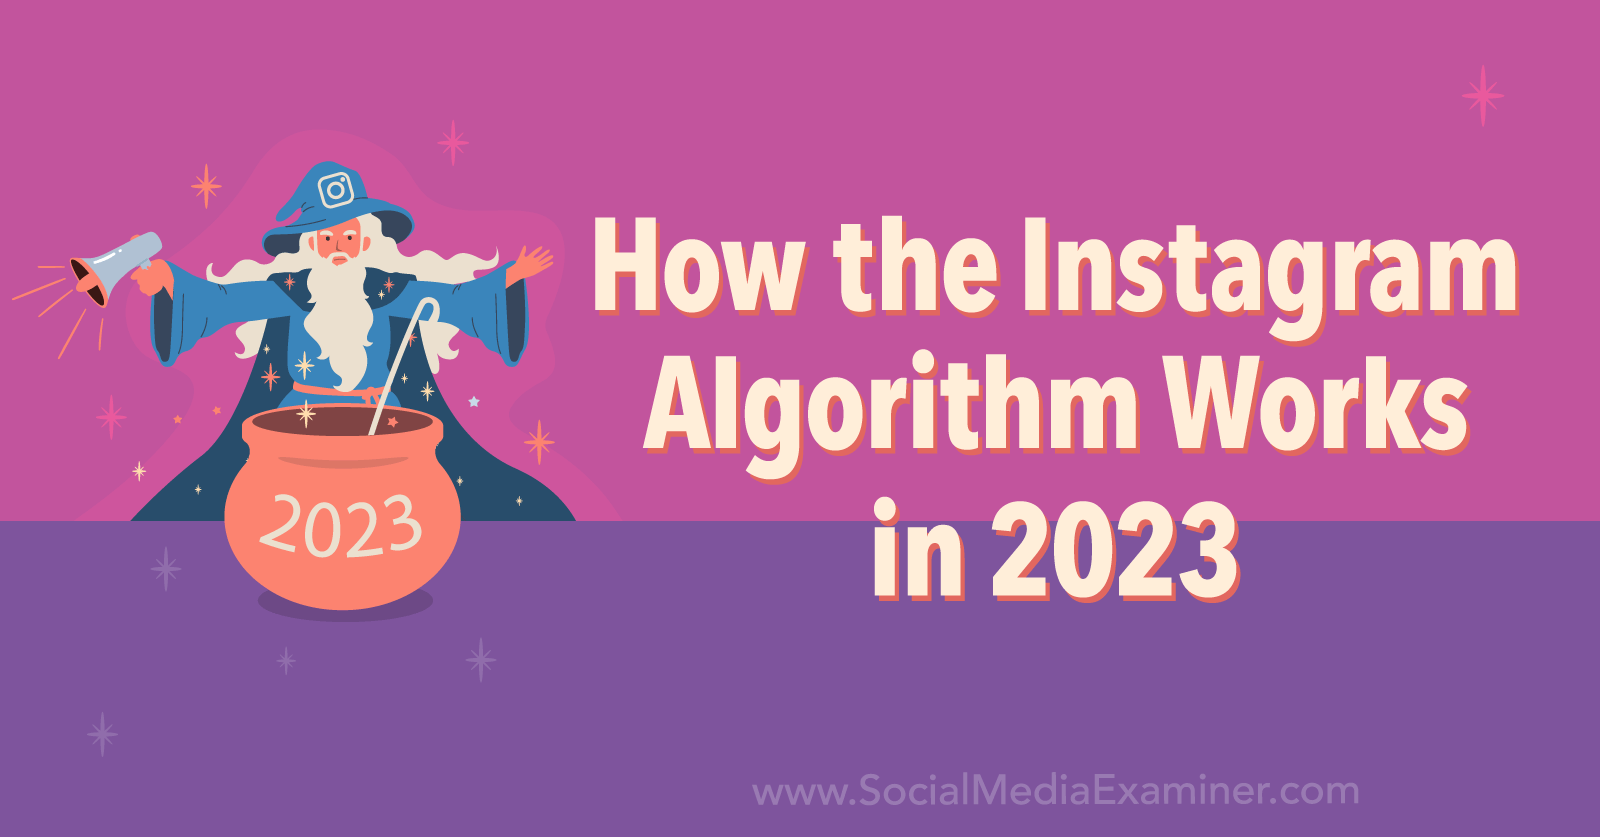 How the Instagram Algorithm Works in 2023 by Social Media Examiner